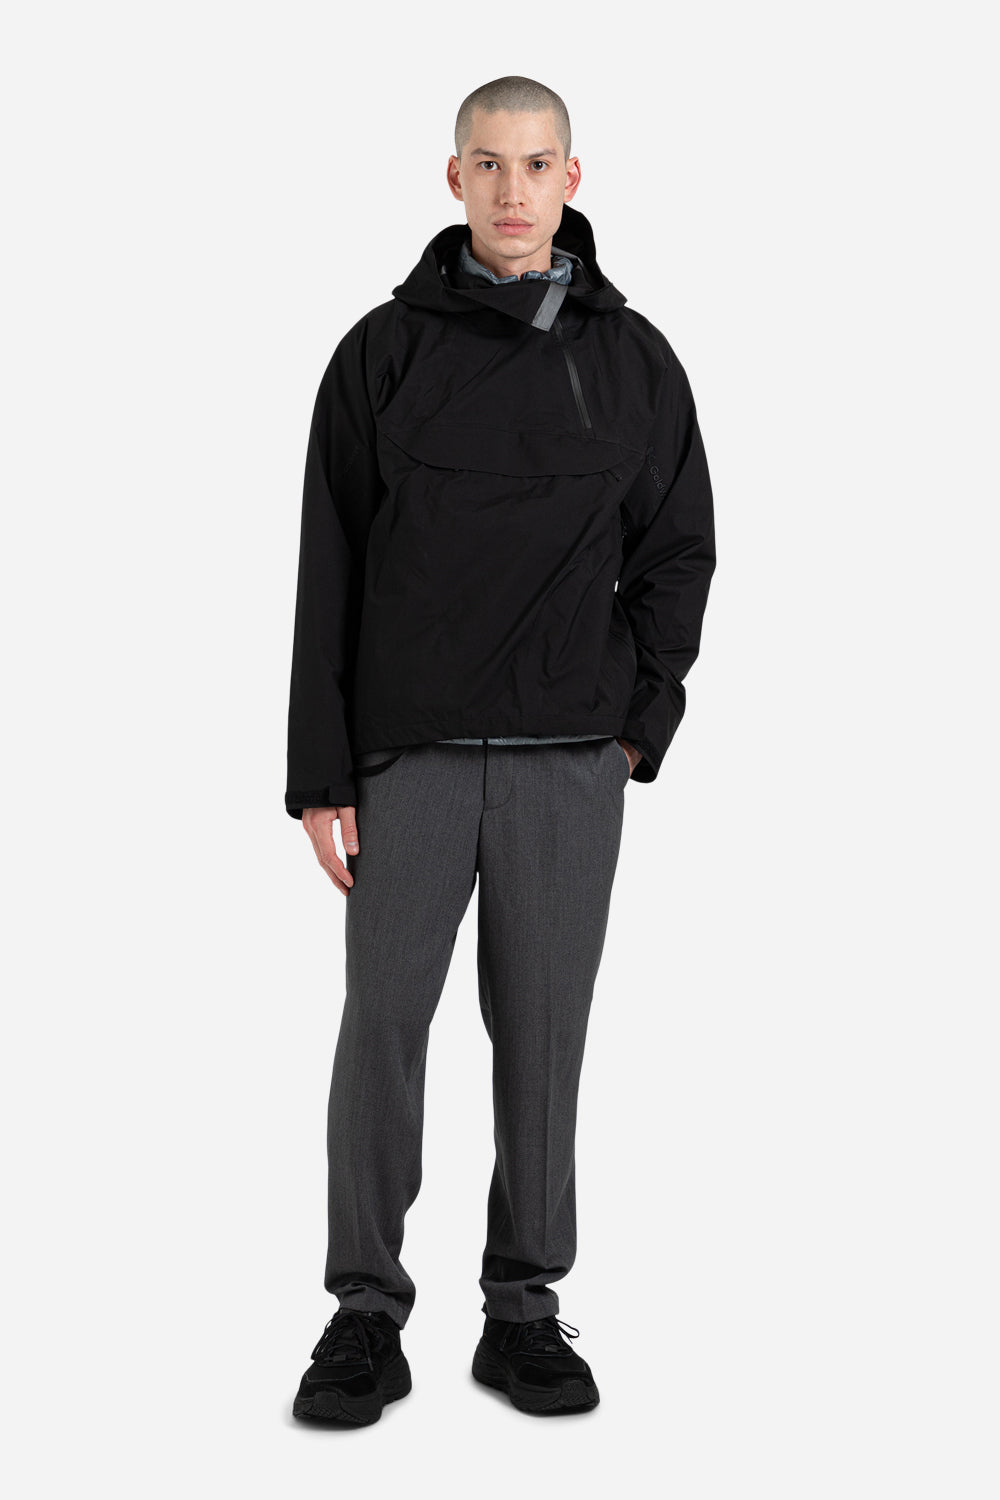 Goldwin GORE-TEX Fly Air Pullover in Black - Wallace Mercantile Shop